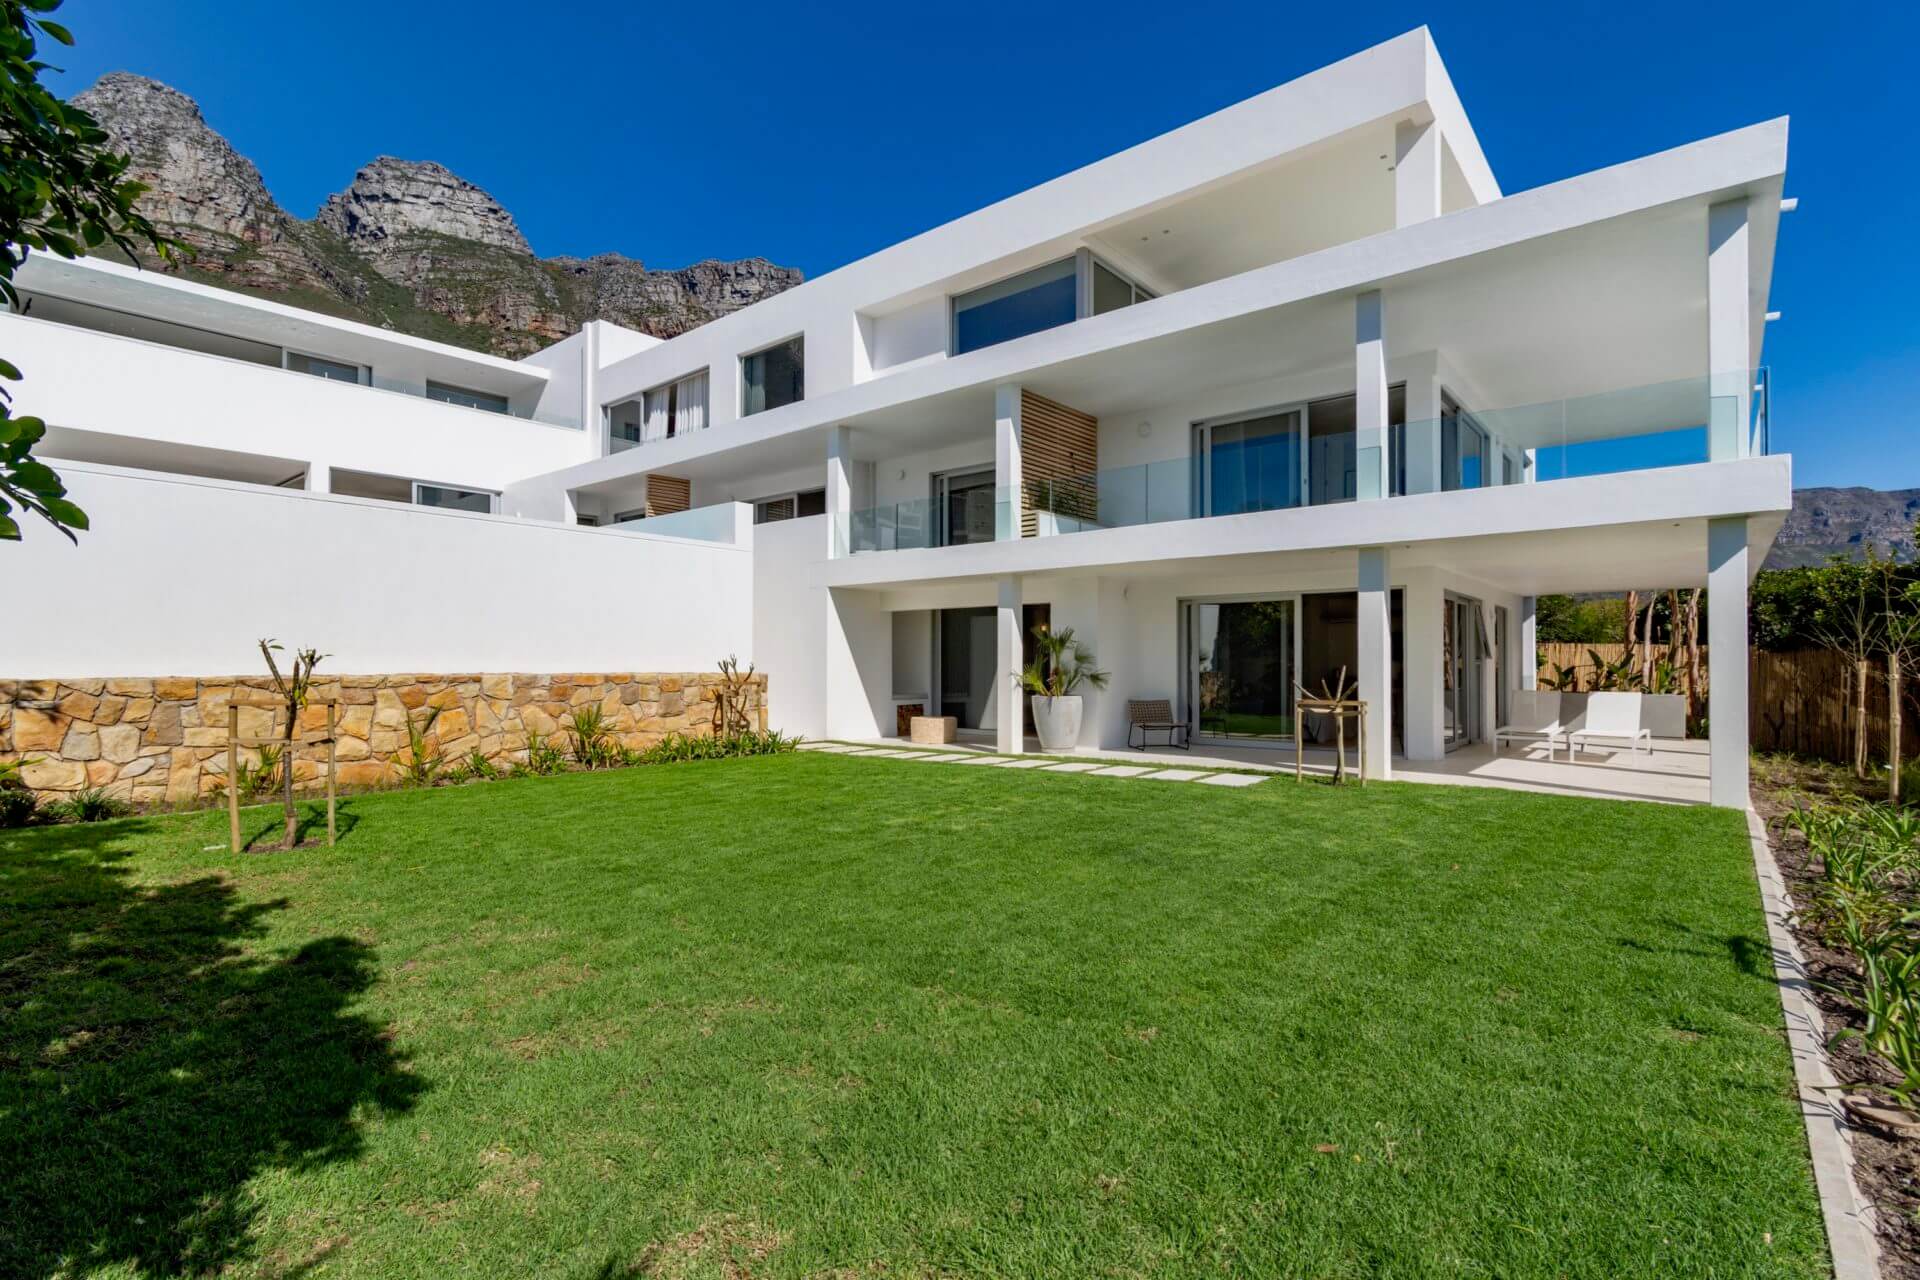 Photo 13 of Villa Ibiza accommodation in Camps Bay, Cape Town with 8 bedrooms and 8 bathrooms